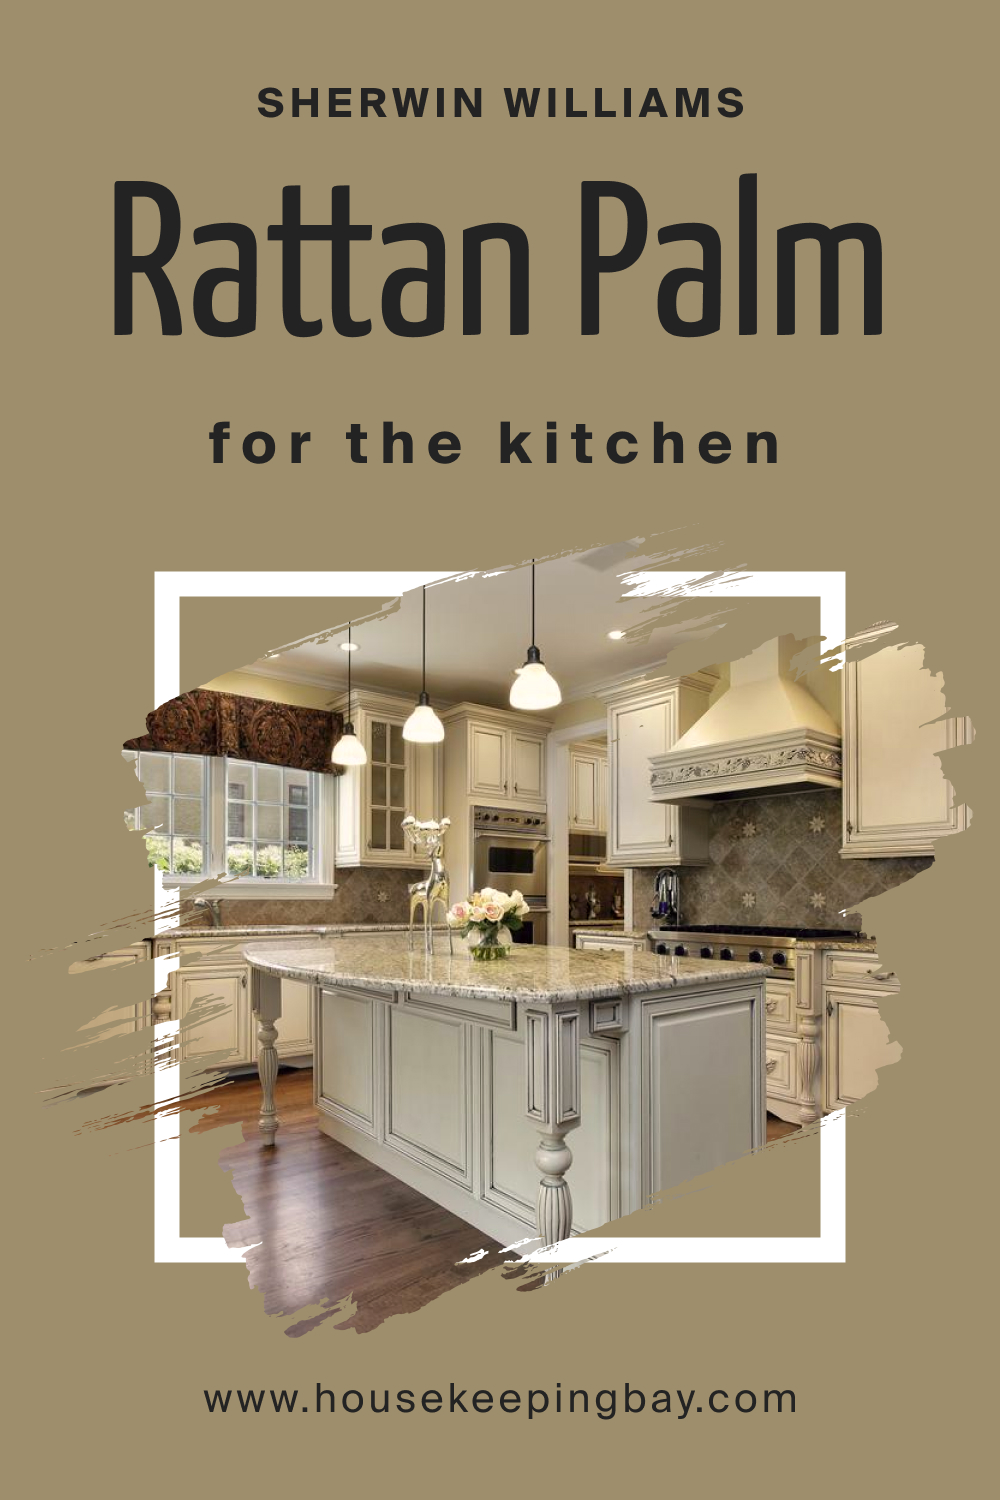 Sherwin Williams. SW 9533 Rattan Palm For the Kitchens